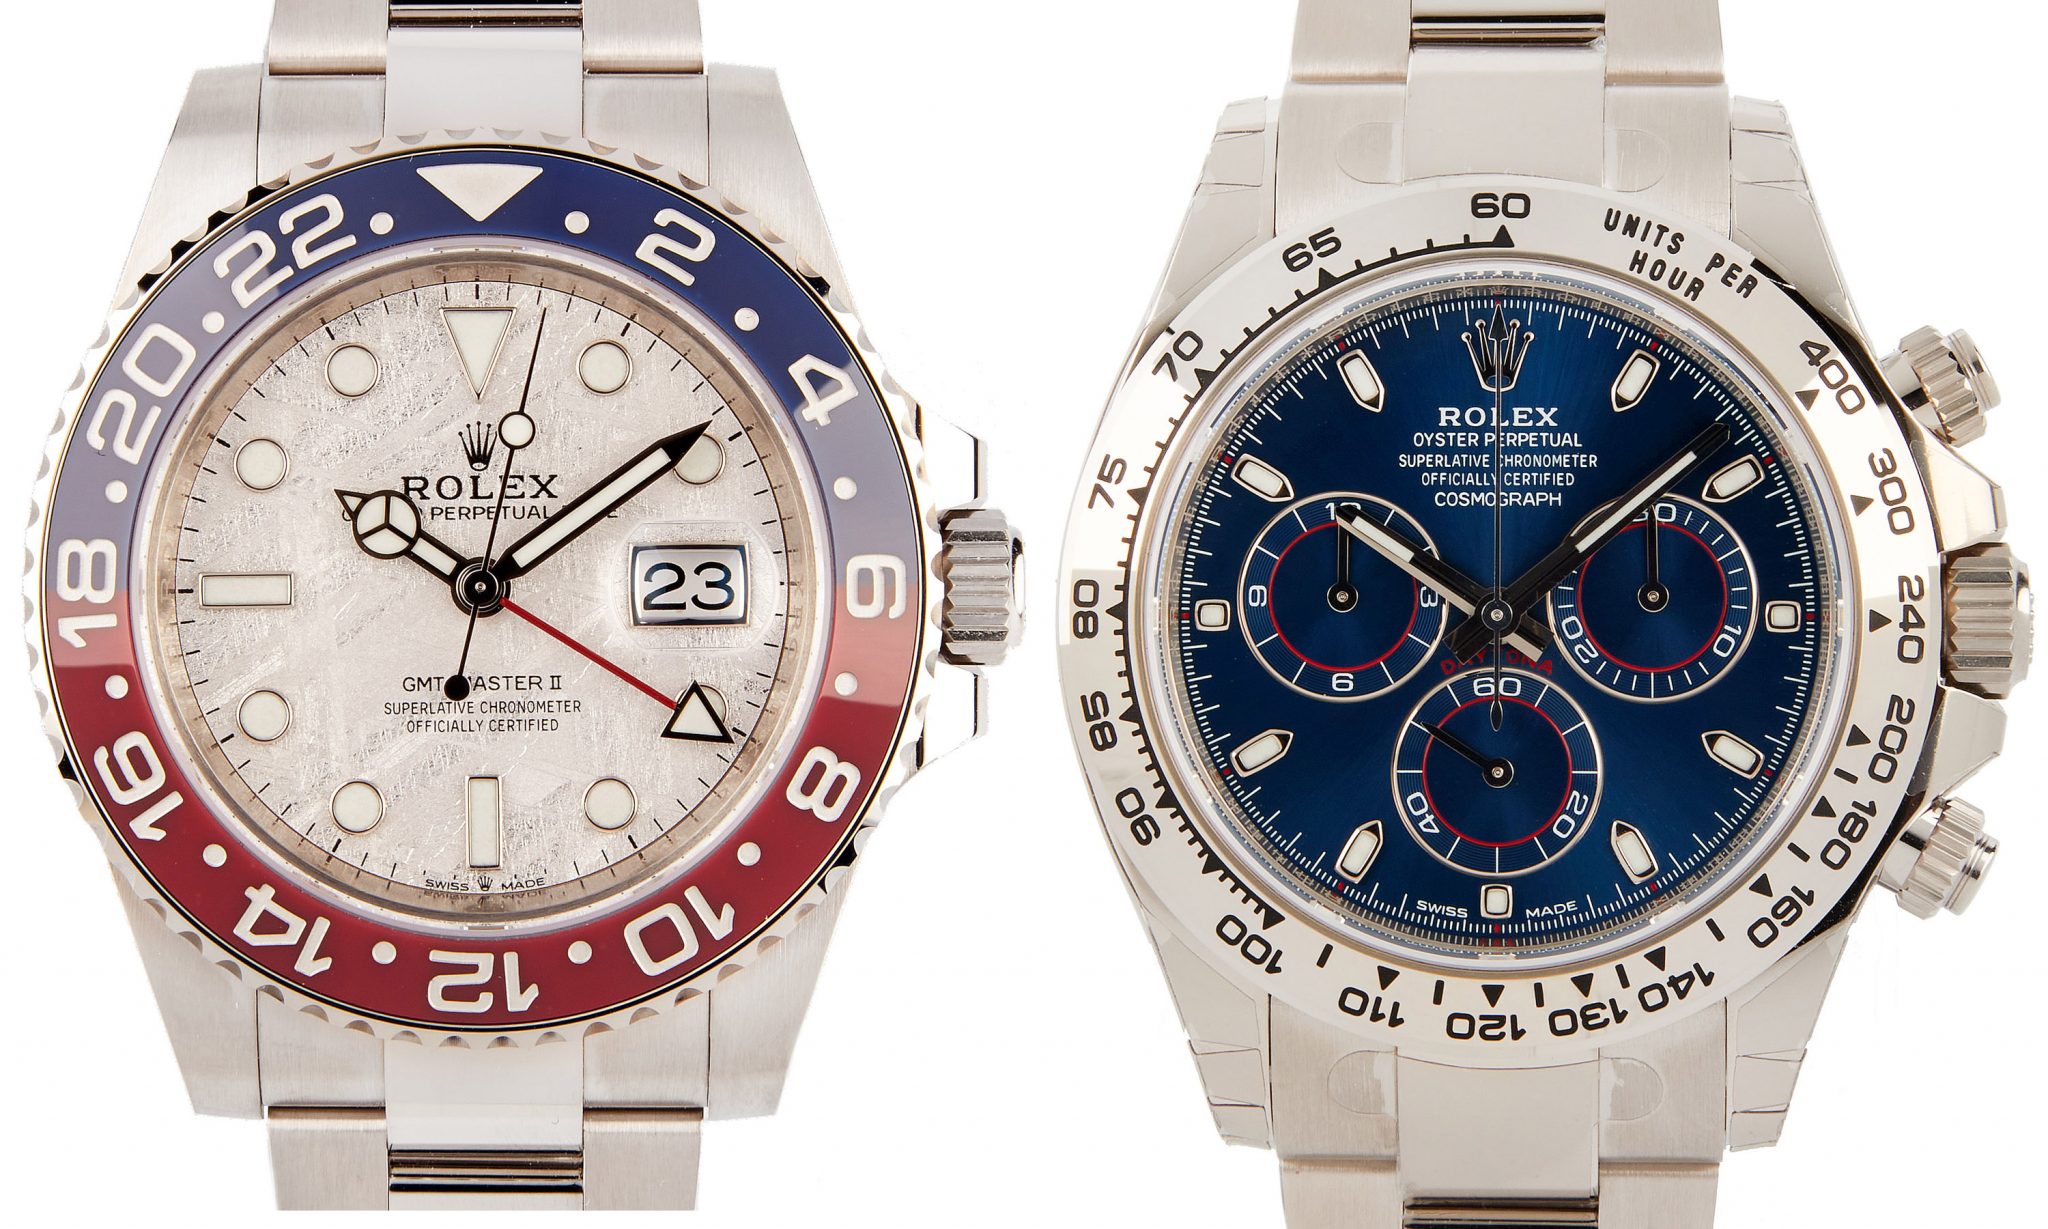 White gold is the steel for Rolex watch collectors